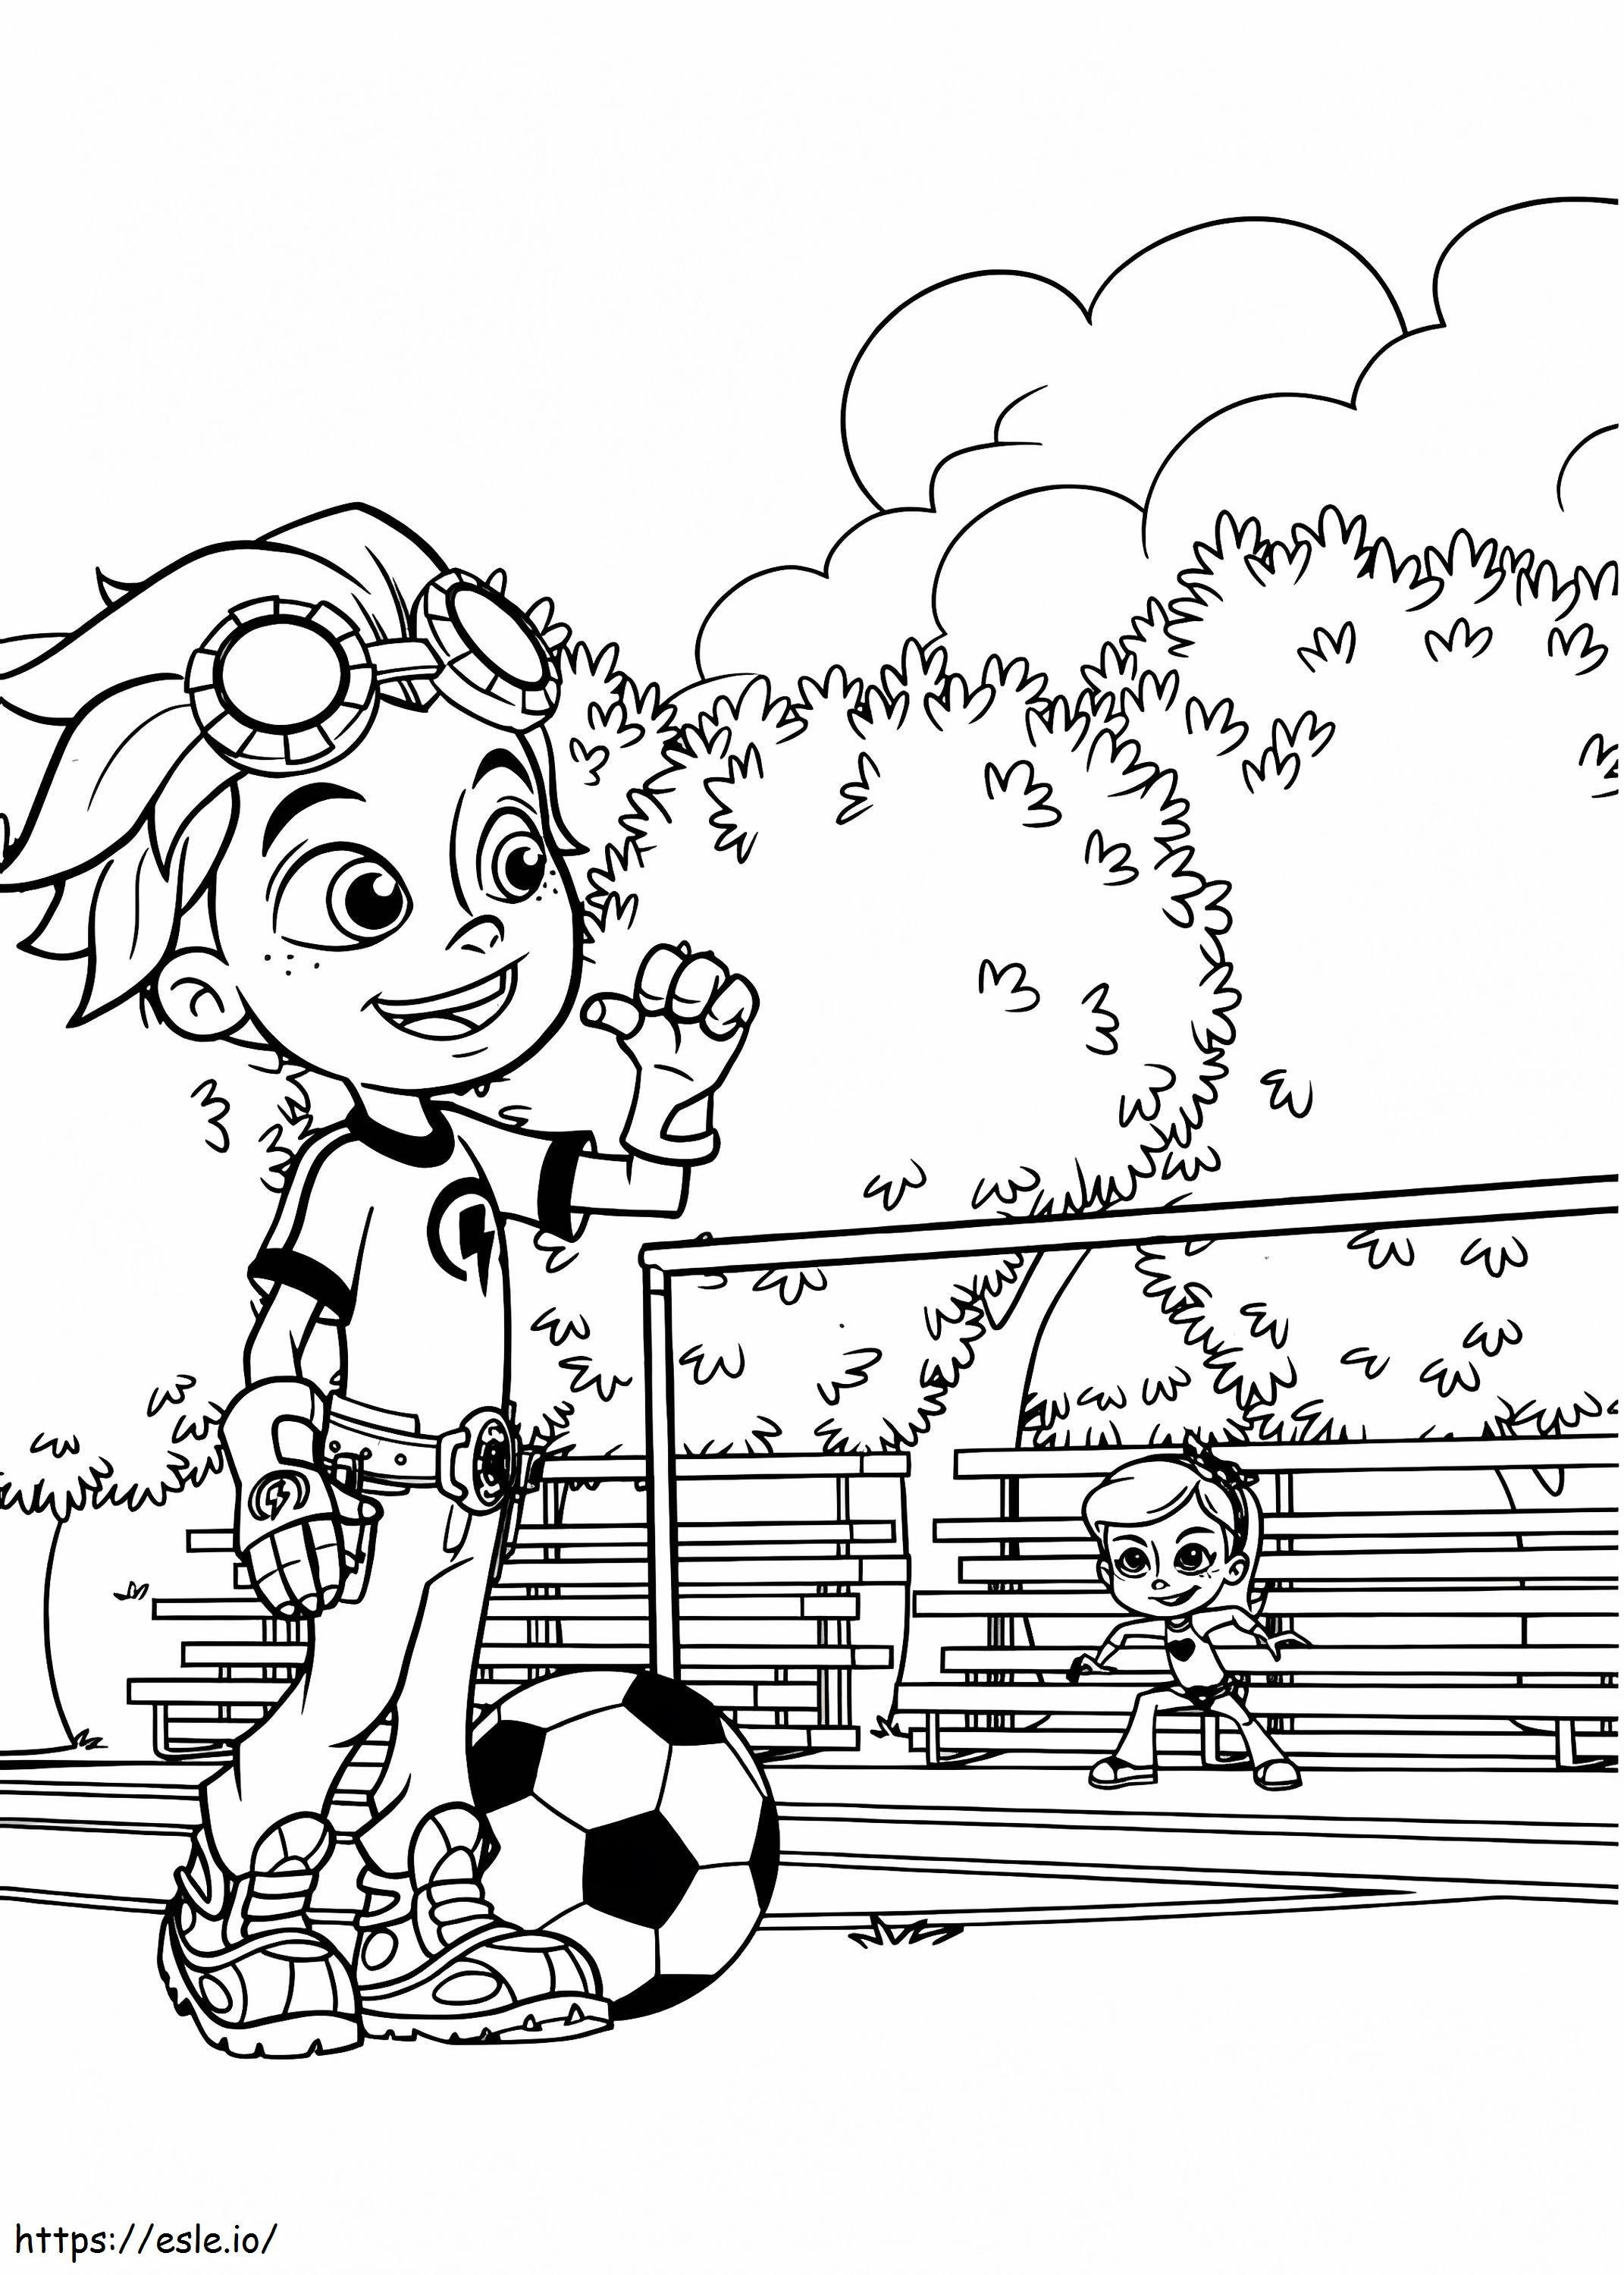 1535791460 Rusty Playing Soccer A4 coloring page